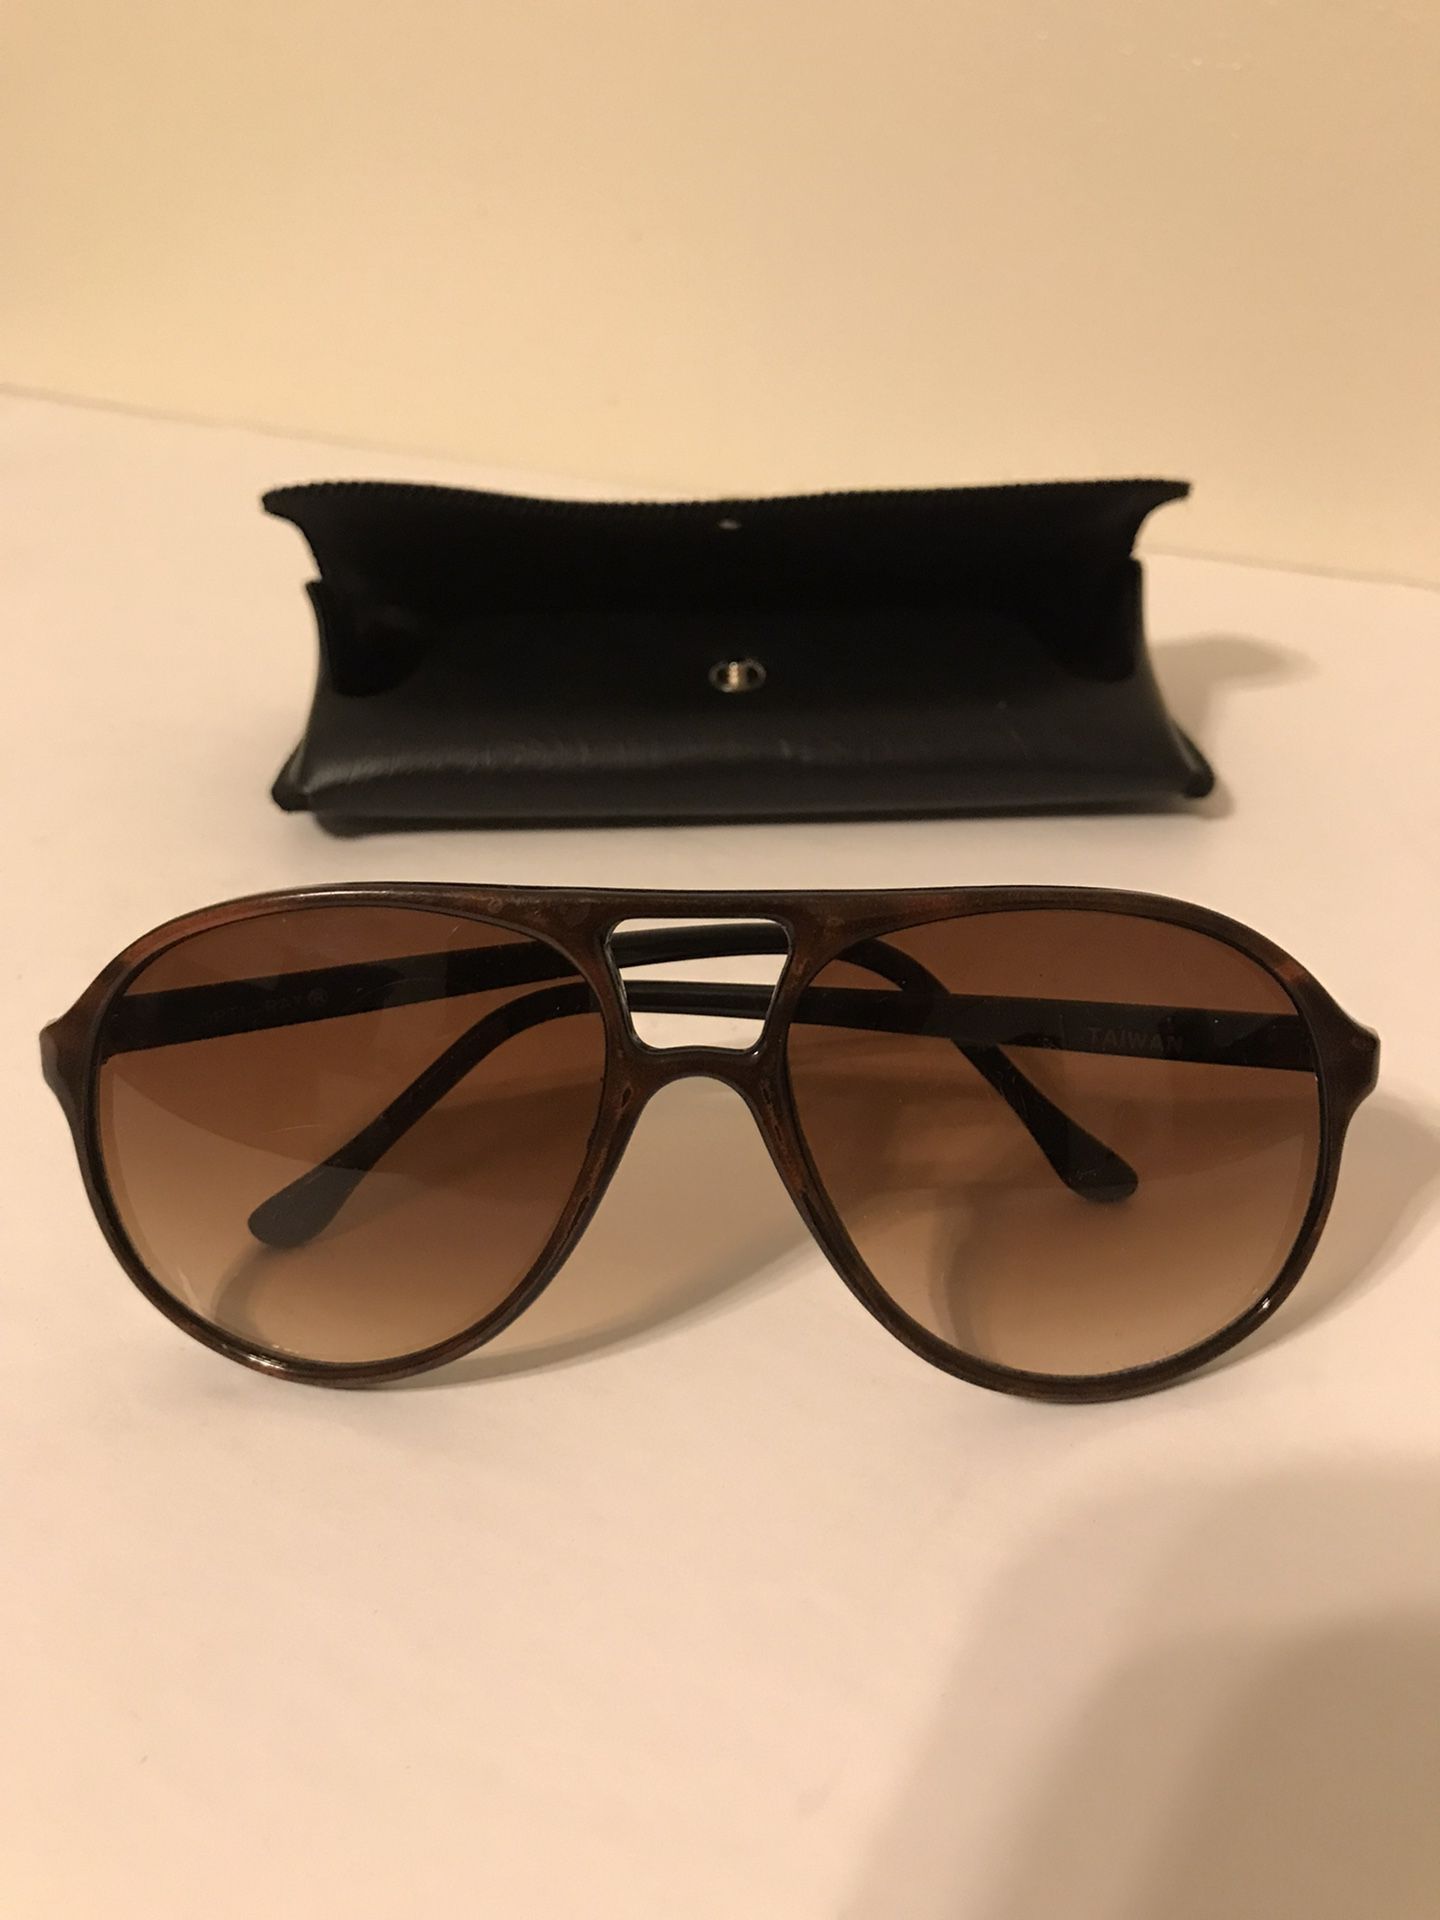 Vintage 1970’s Opti-Ray Aviator Sunglasses in Excellent Used Condition